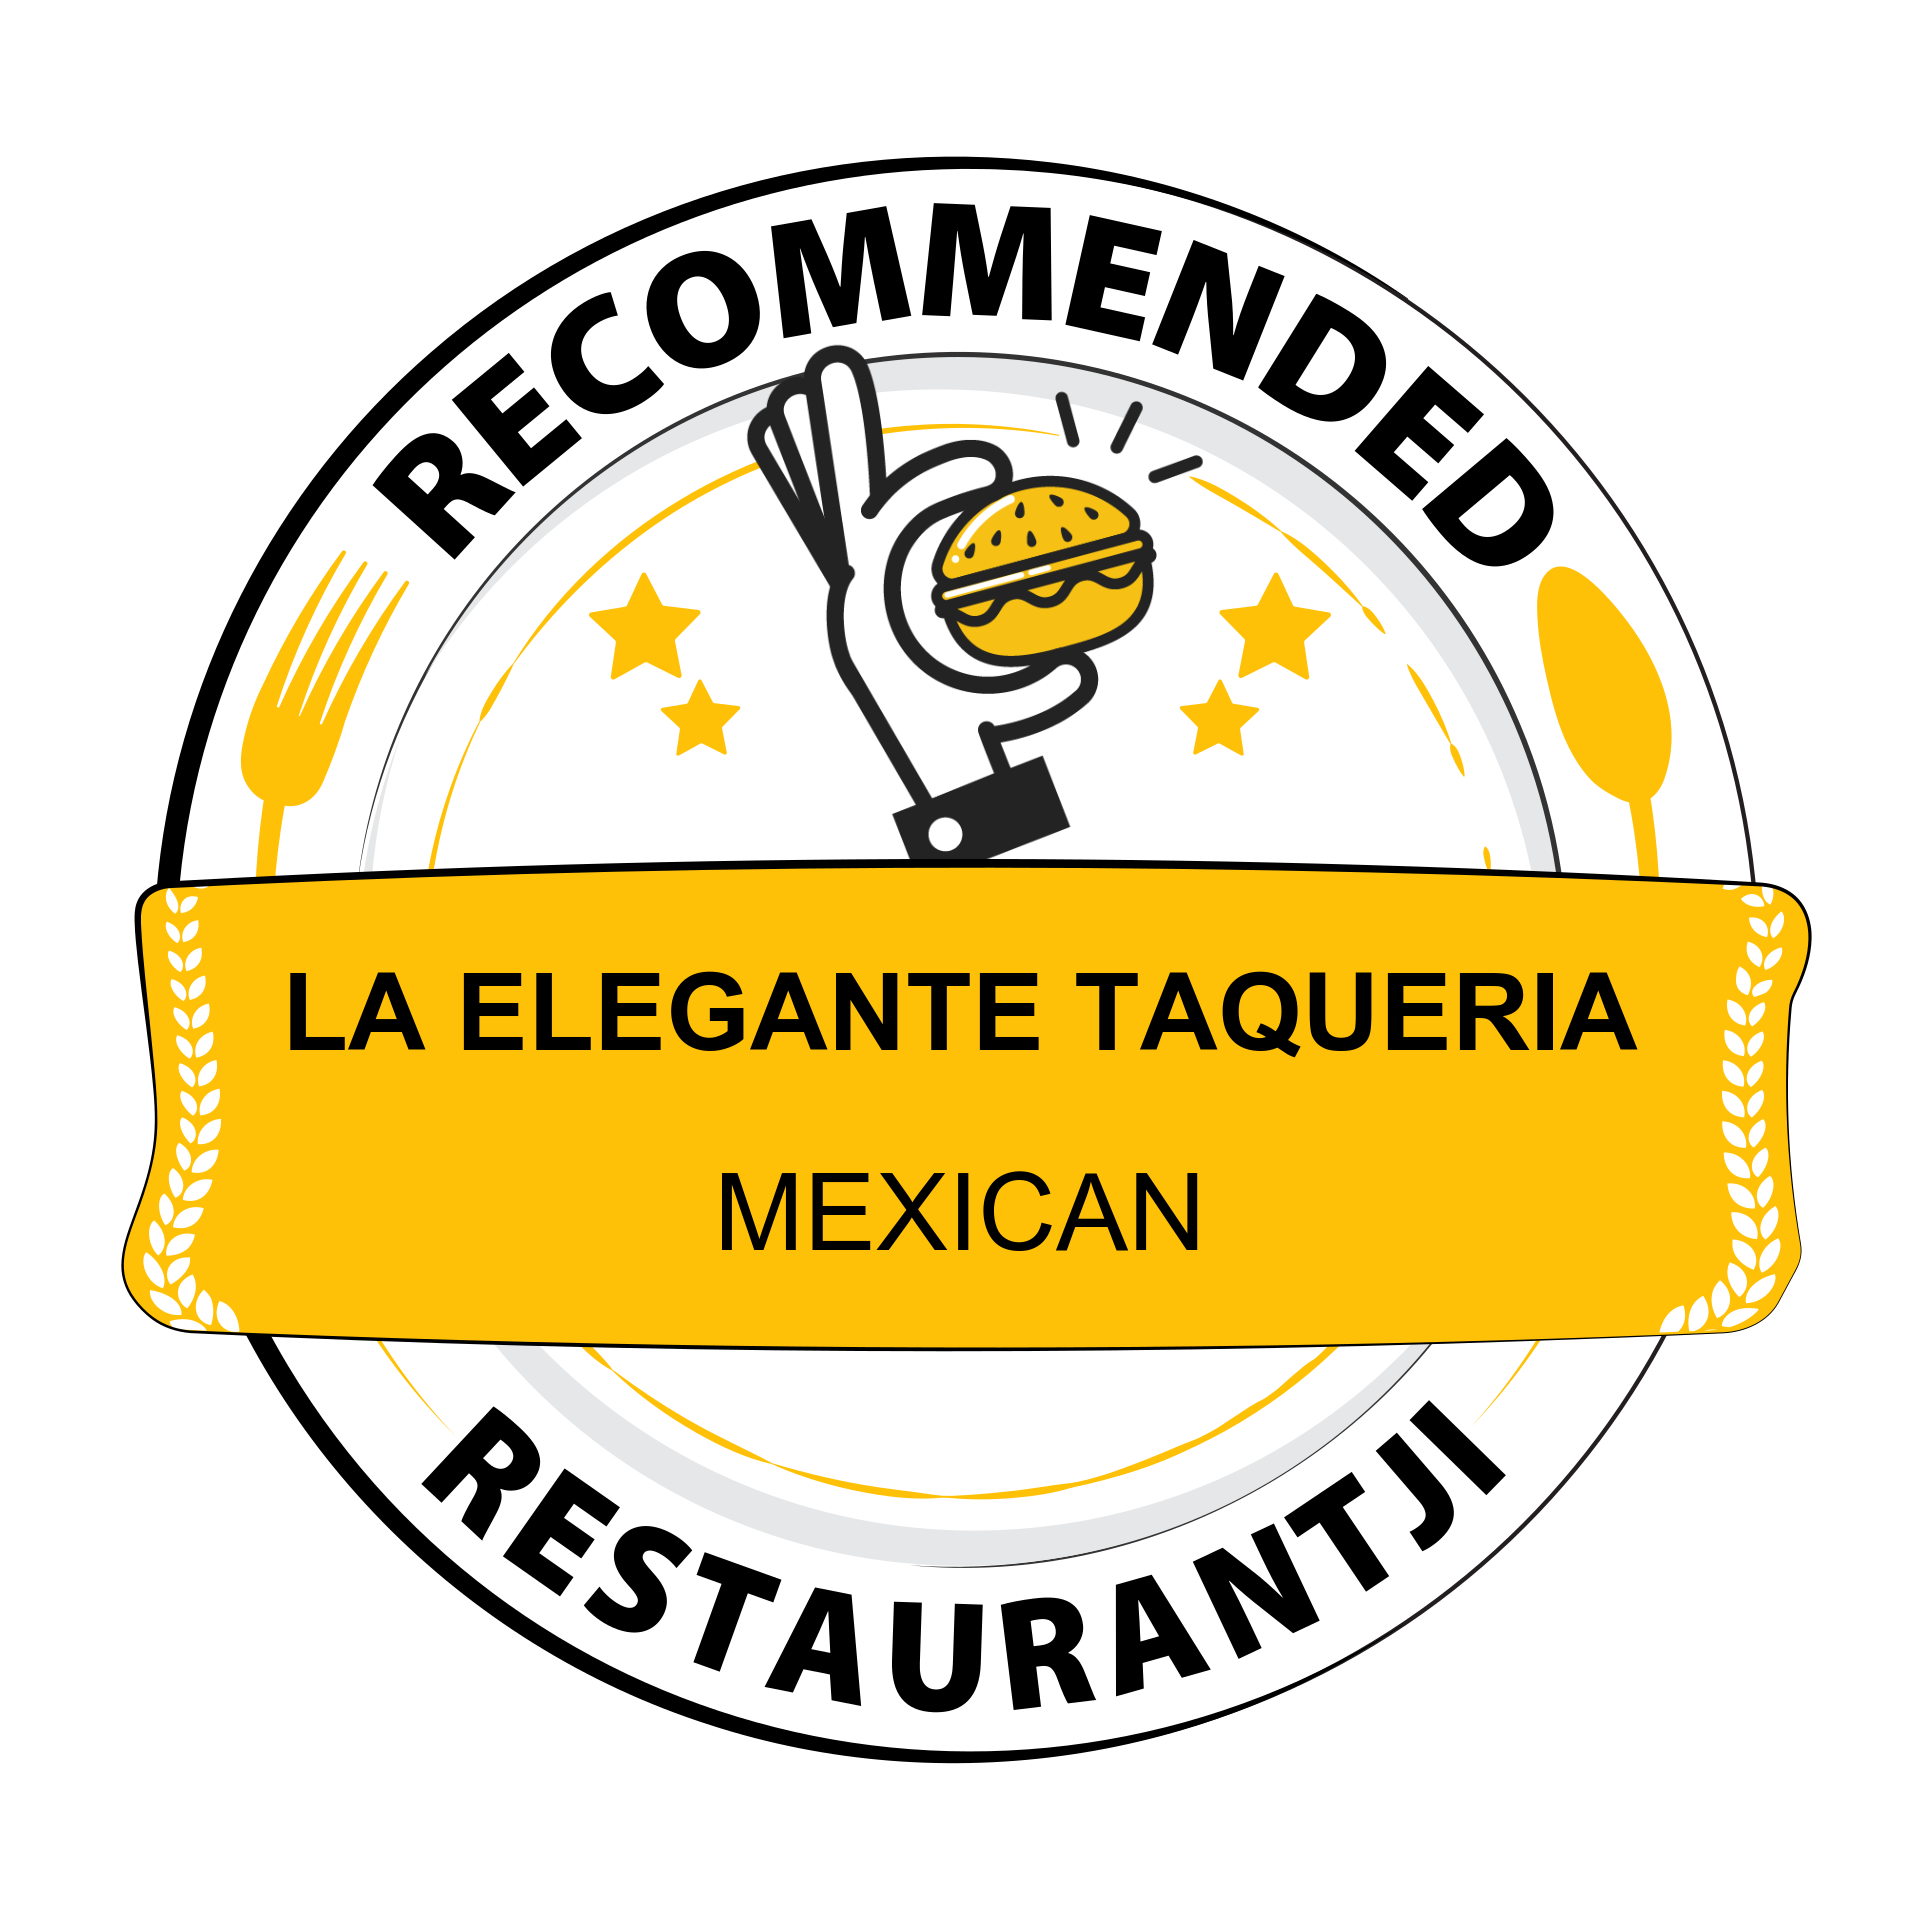 La Elegante is celebrated on Restaurantji - featuring the latest reviews and ratings for restaurants in your area.